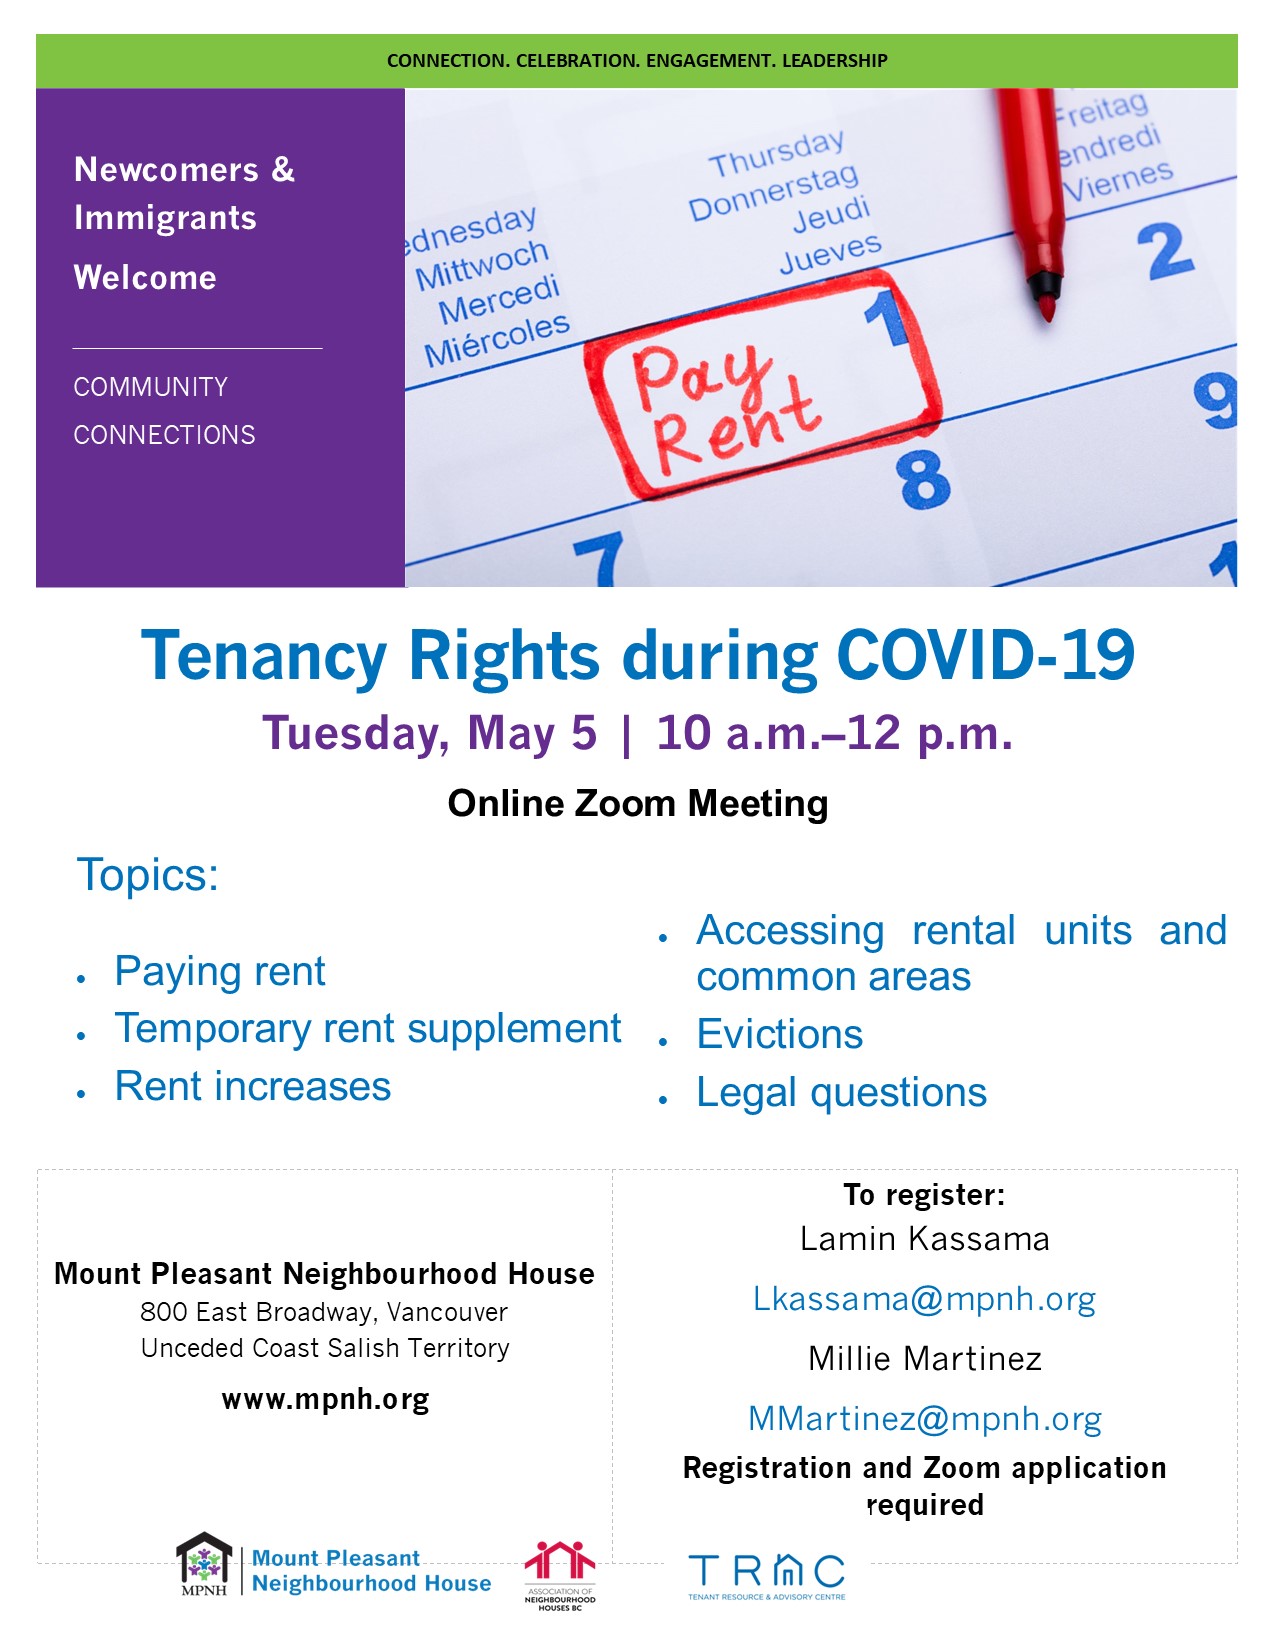 Poster for Tenancy Rights workshop showing calendar reminder to pay rent